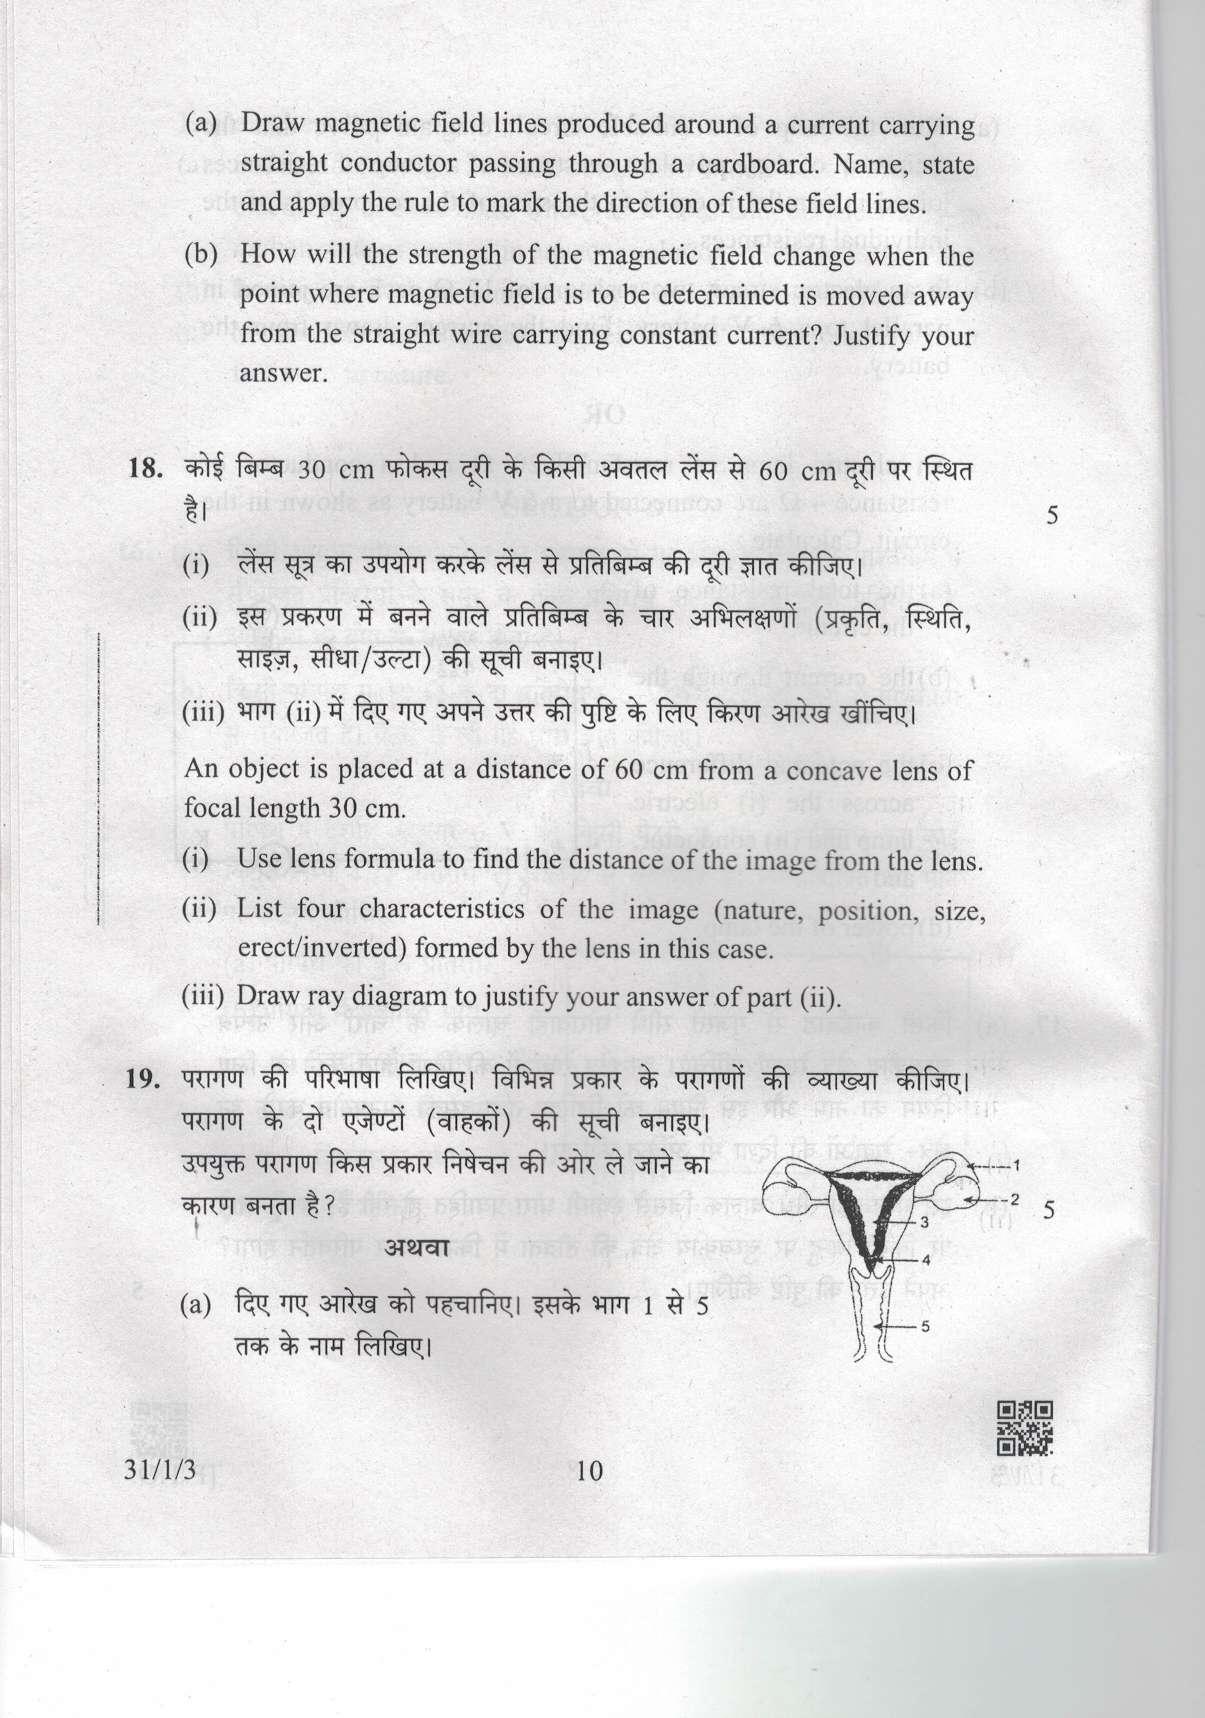 CBSE Class 10 31-1-3 Science 2019 Question Paper - Page 10